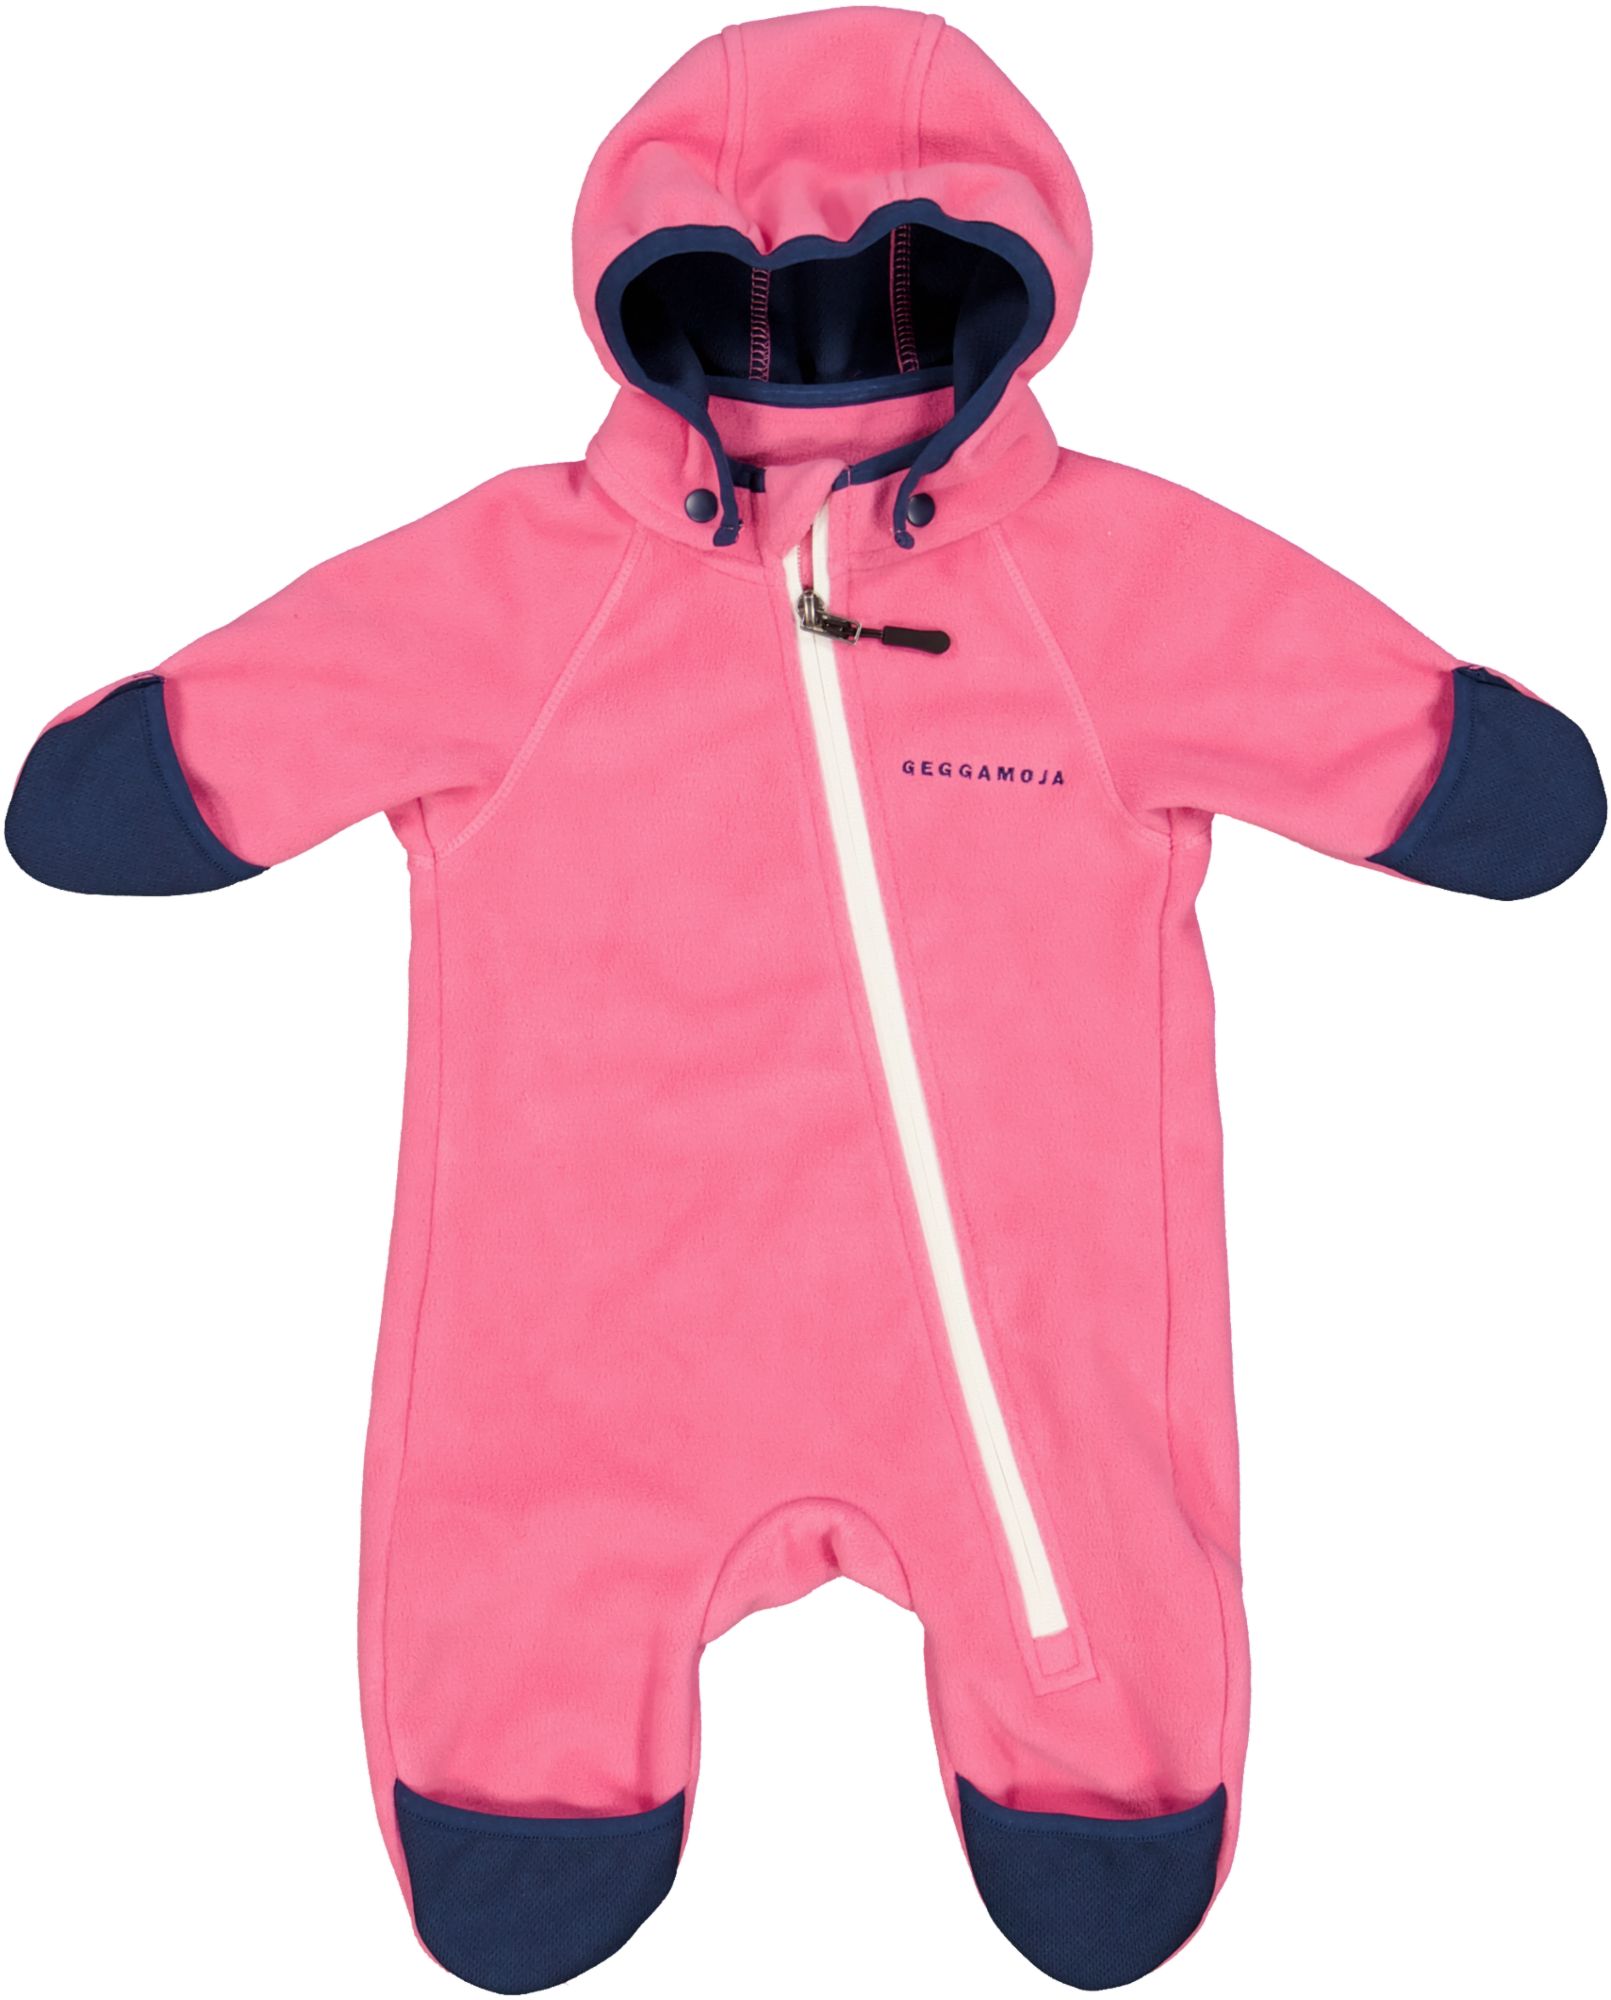 Vindfleeceoverall Rosa 50/56